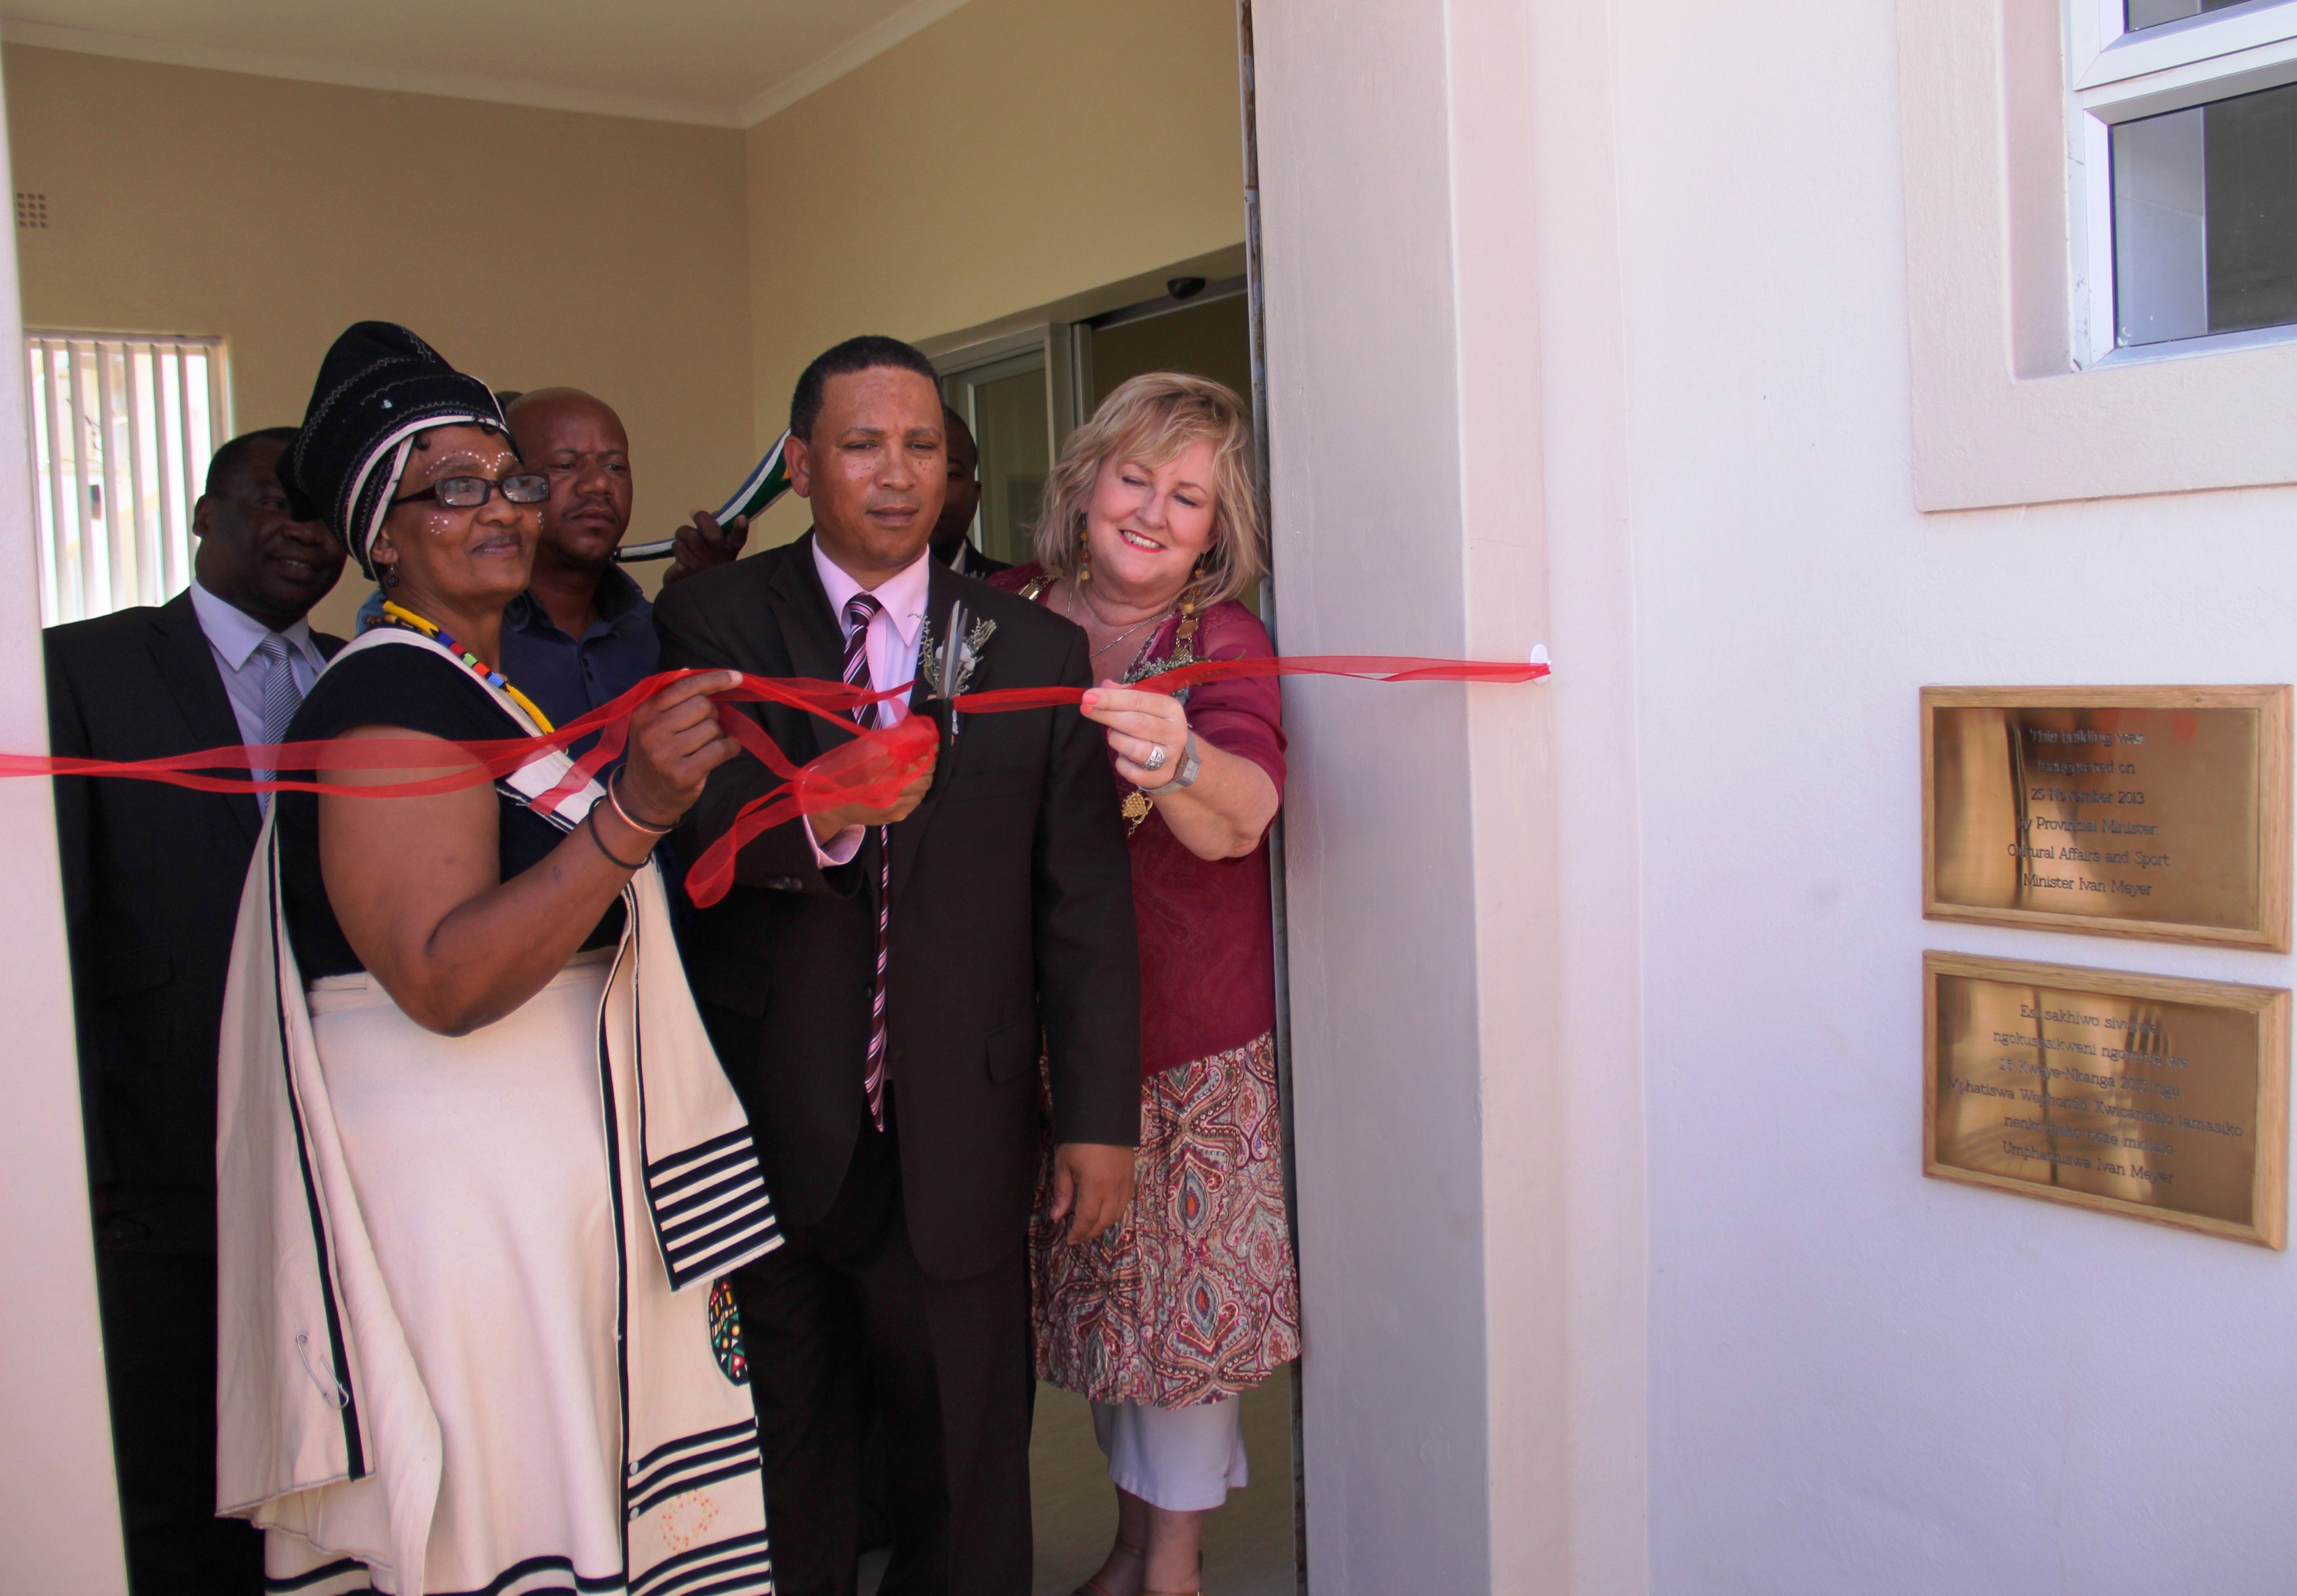 Cllr Noxolo Ngoqi, Minister Meyer and Alderwoman Daniela Gagiano at the ribbon-cutting ceremony.